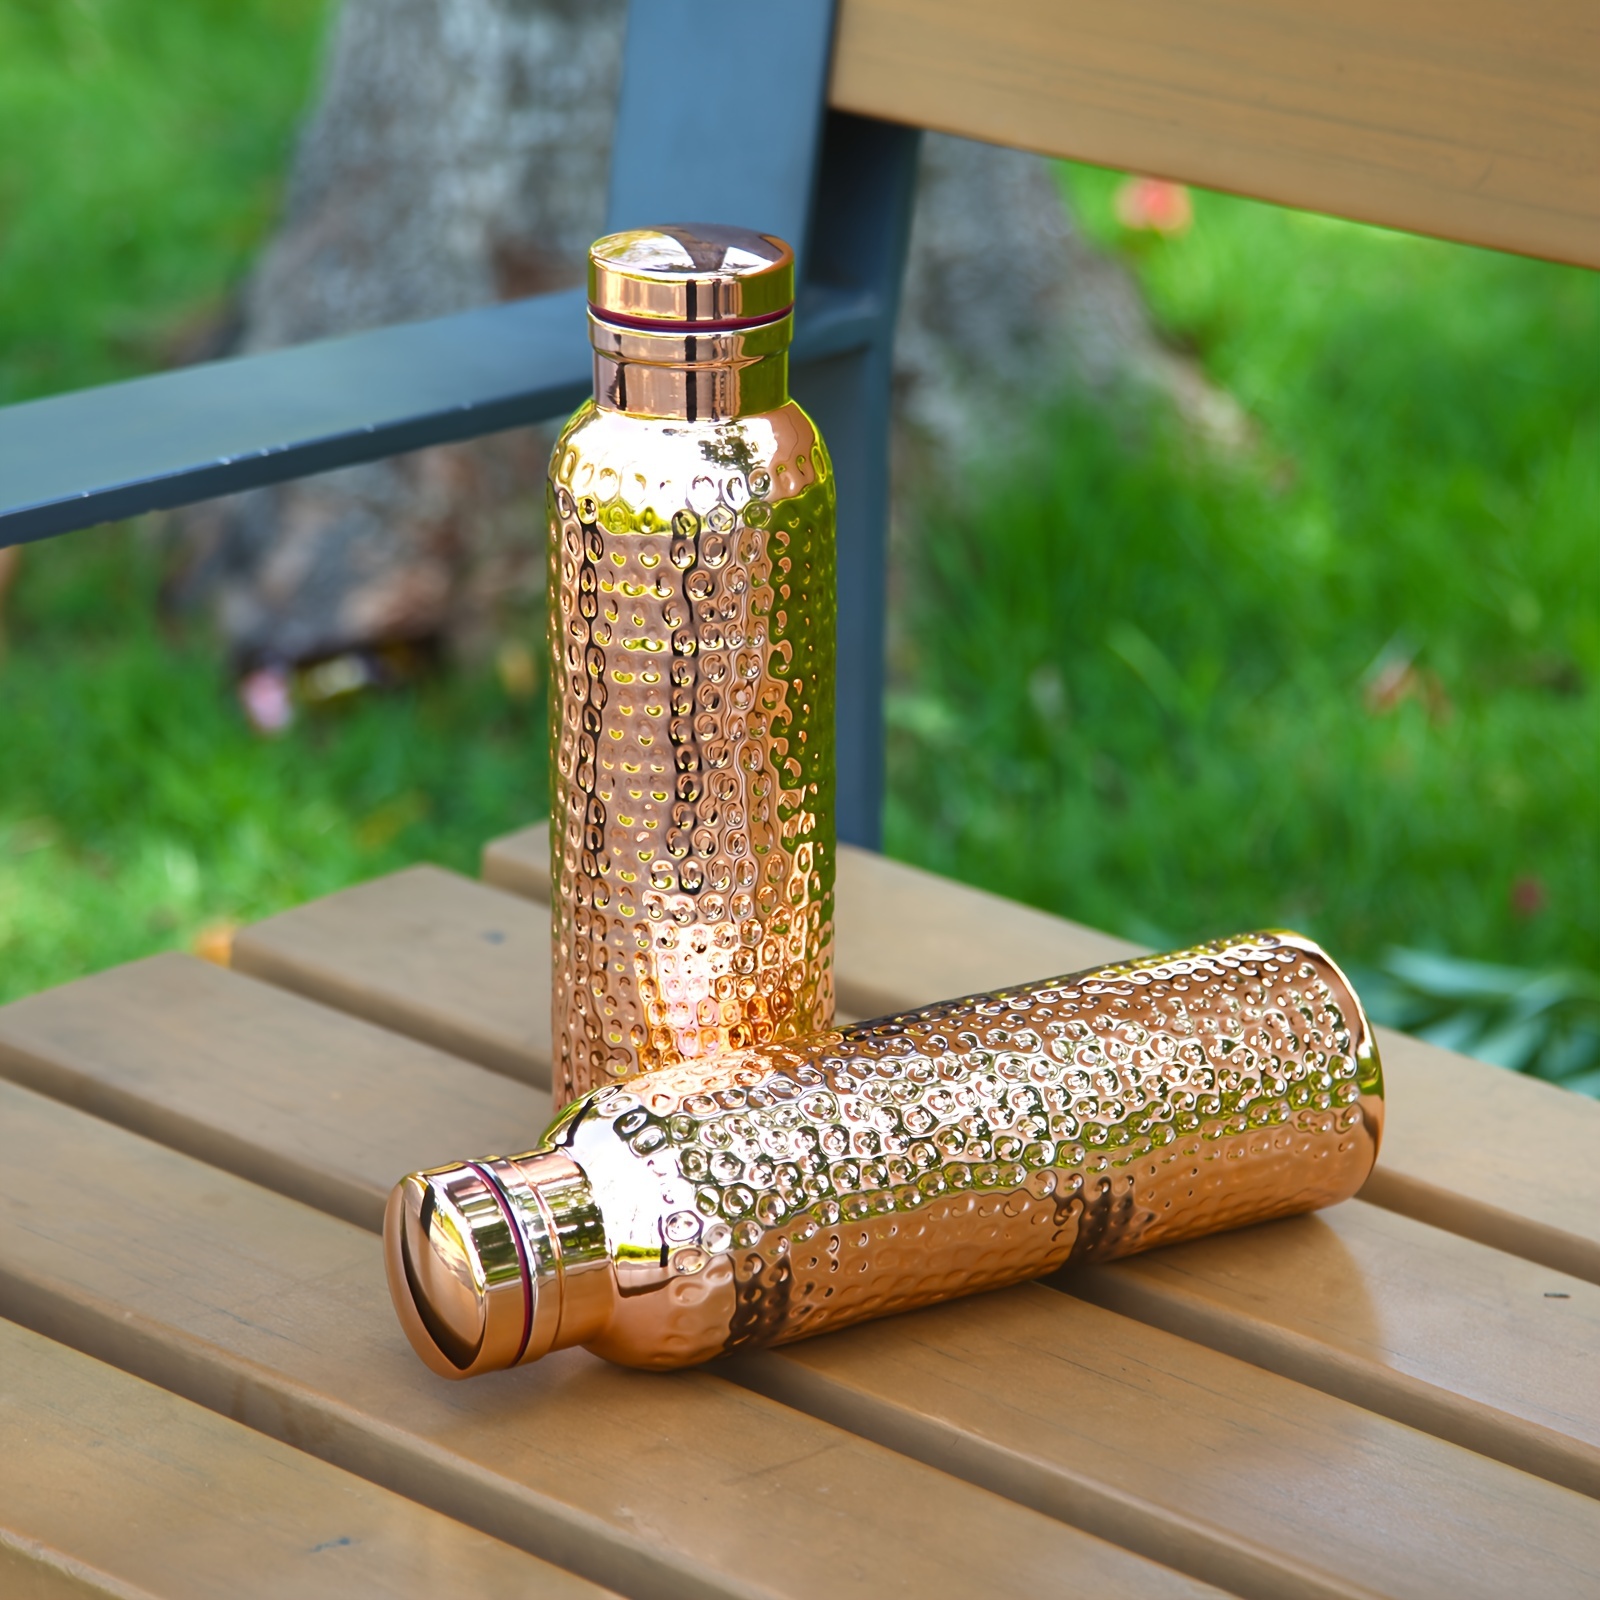 Stainless Steel Double wall insulated Water Bottle Hot or Cold